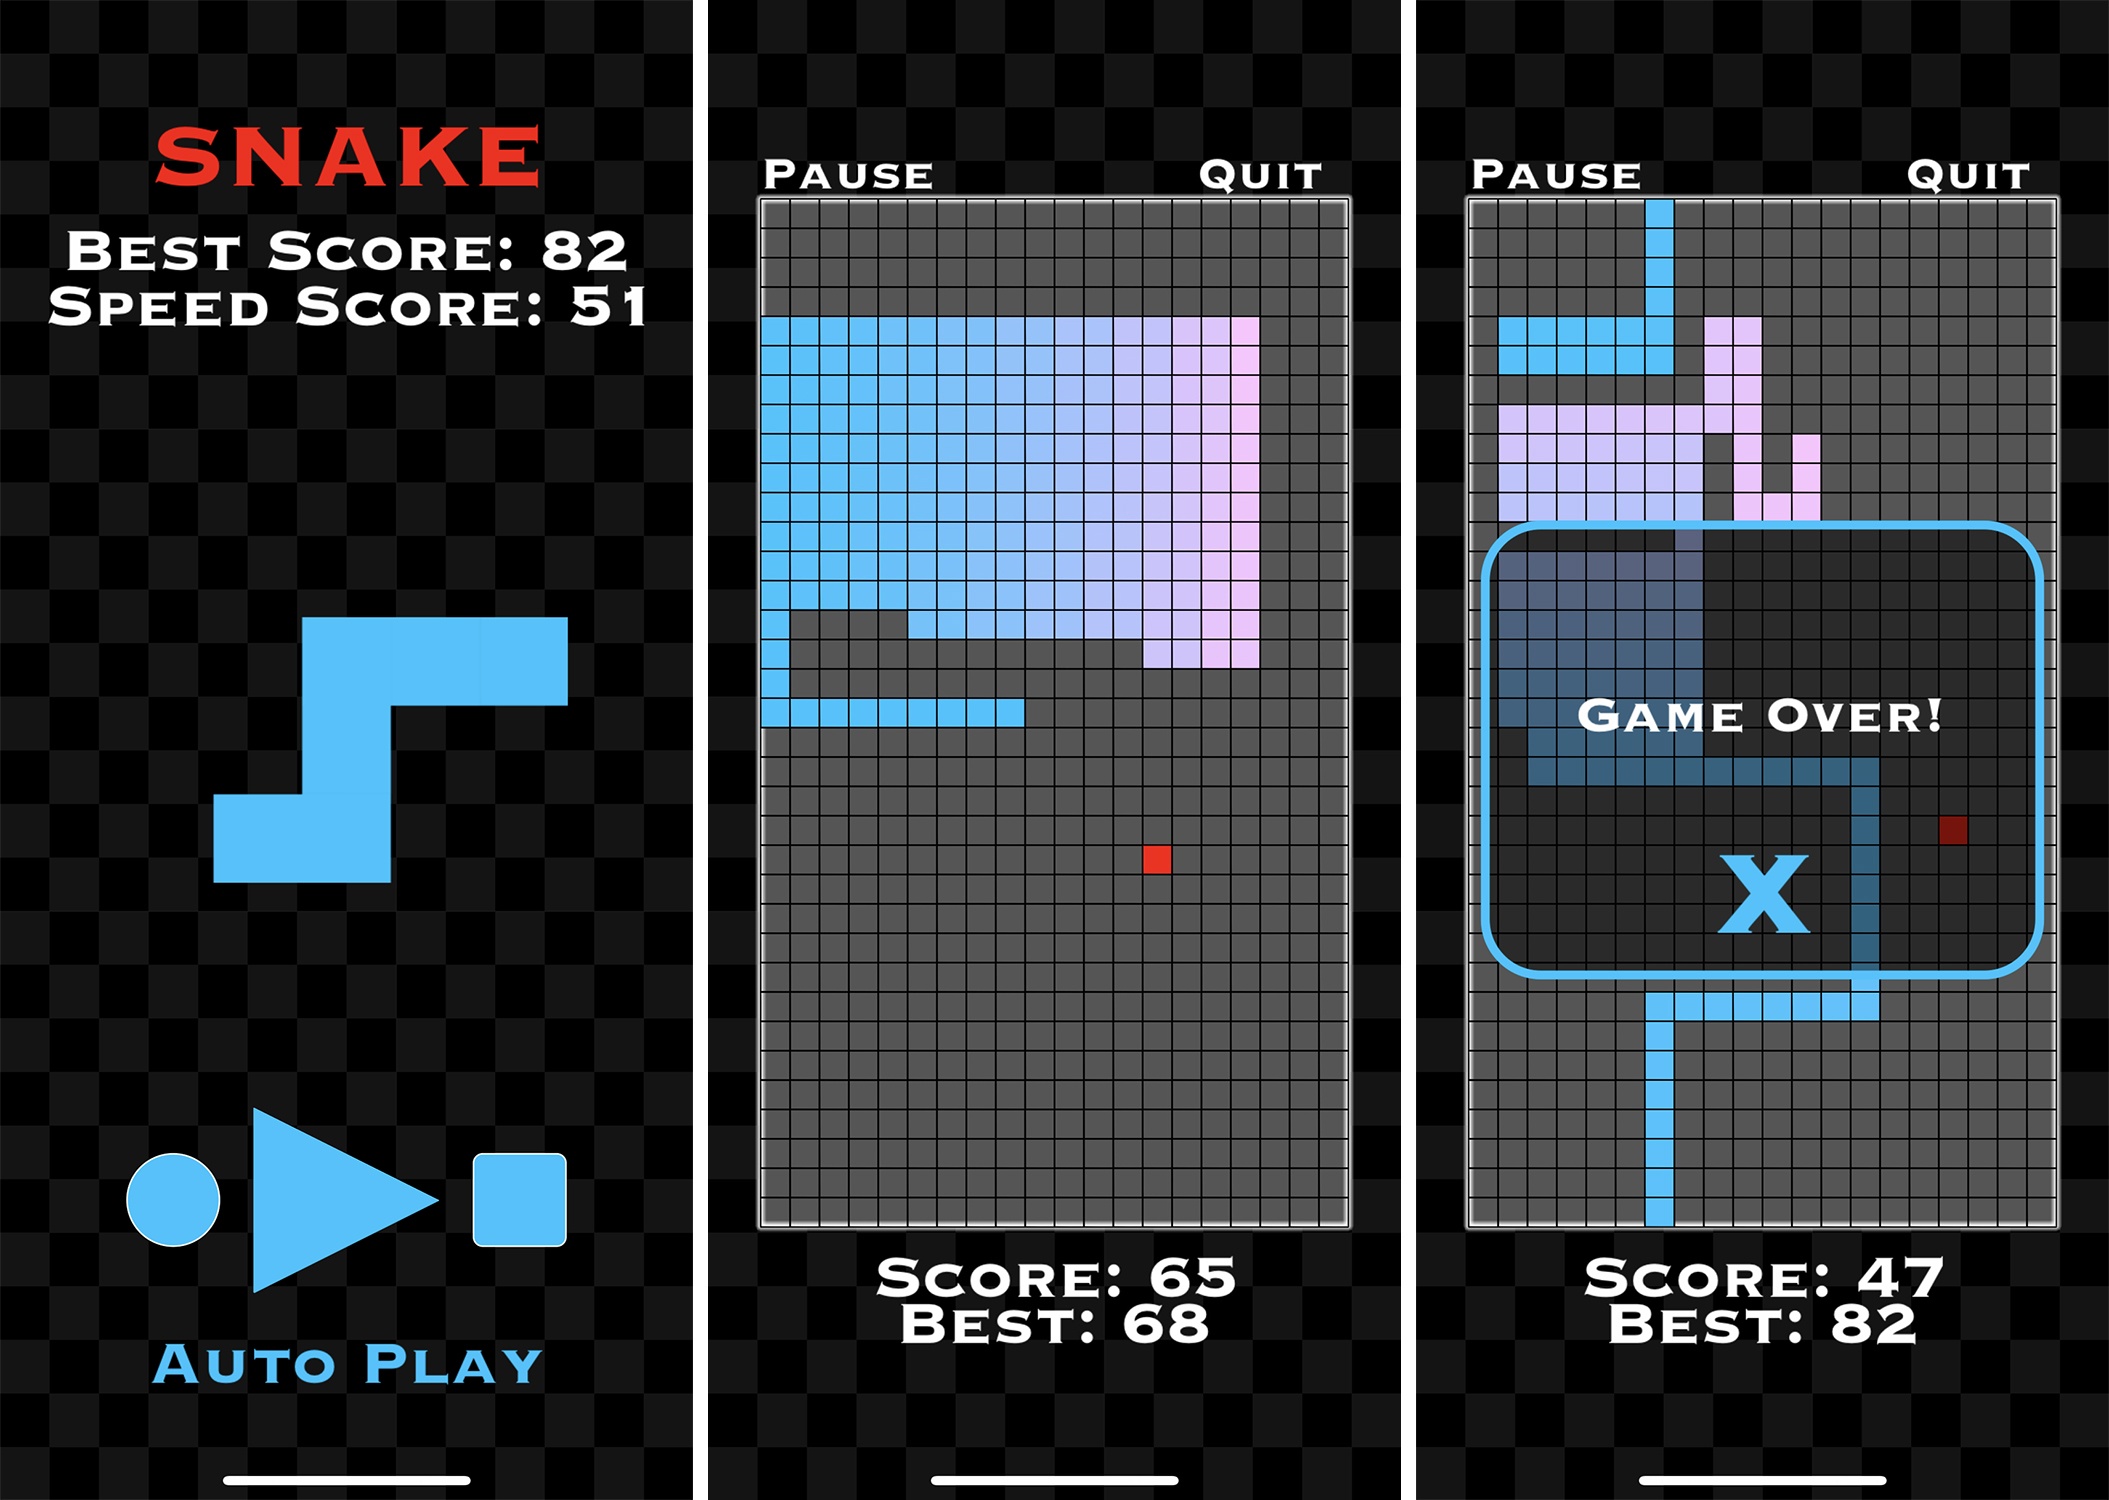 These screenshots show the snake game app that Brady Simon developed, which won him a scholarship to attend the Apple Worldwide Developers Conference in June.